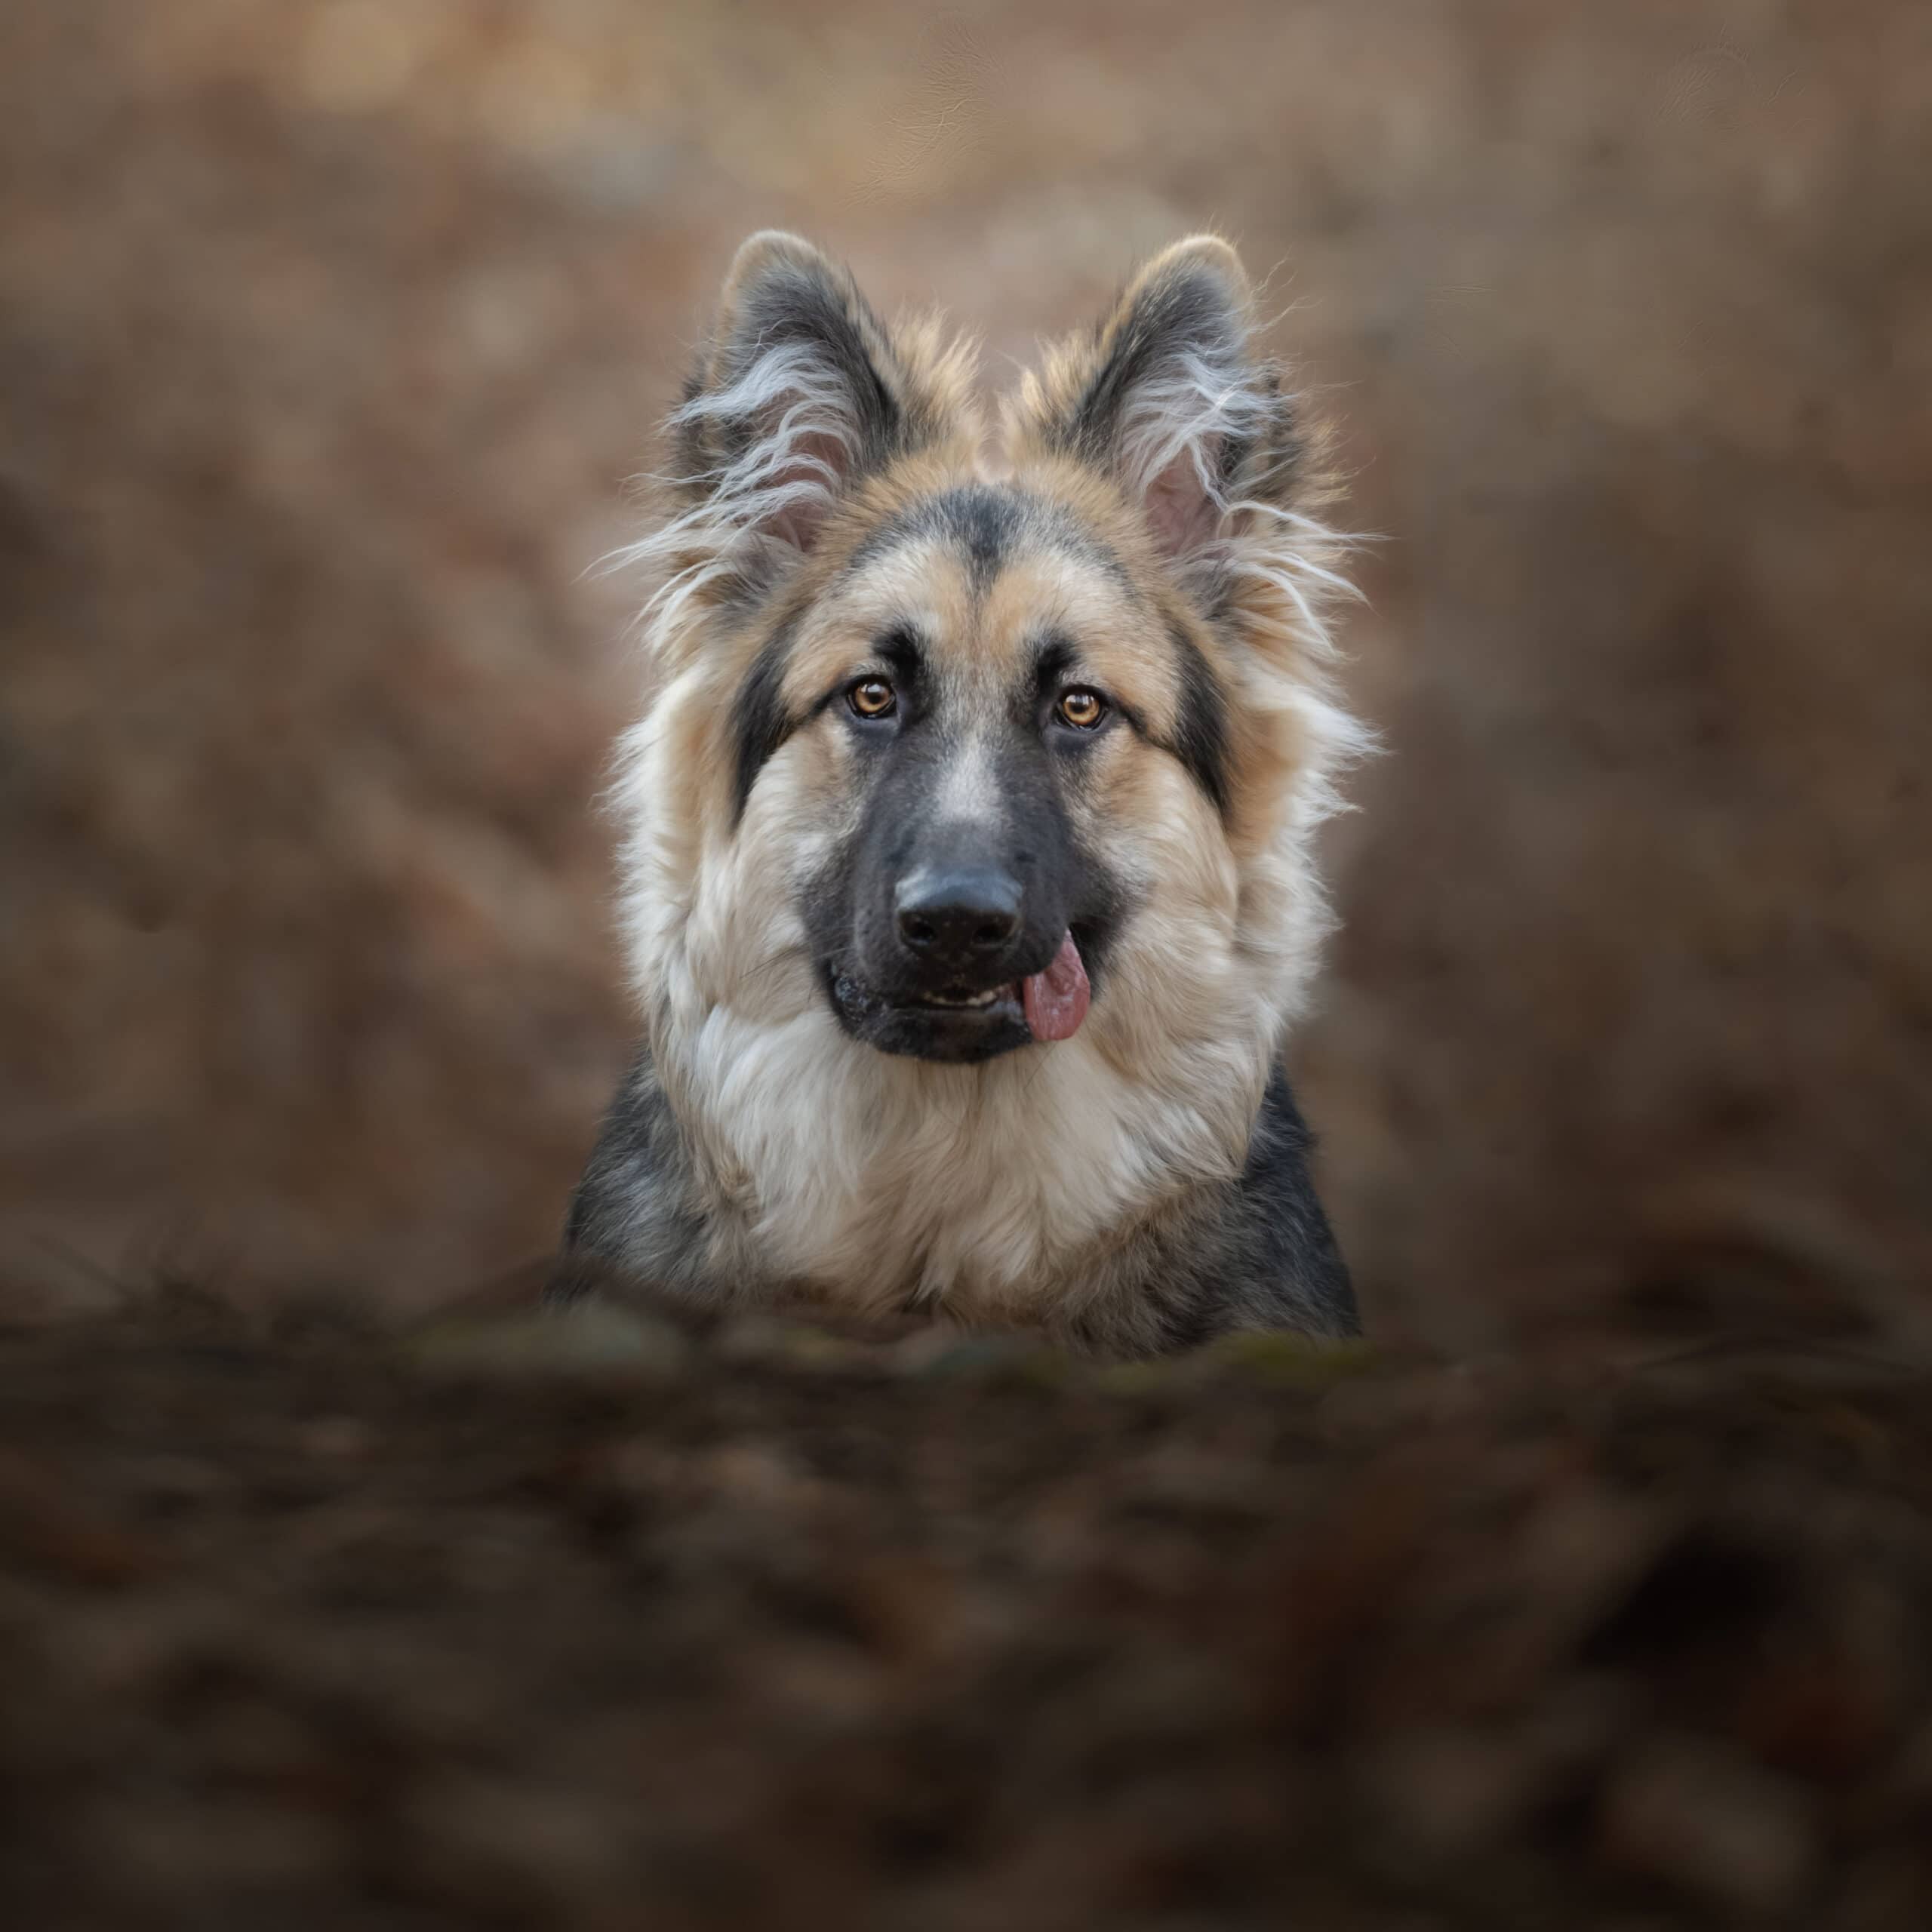 Nic Bisseker Photography dog photoshoot Sussex